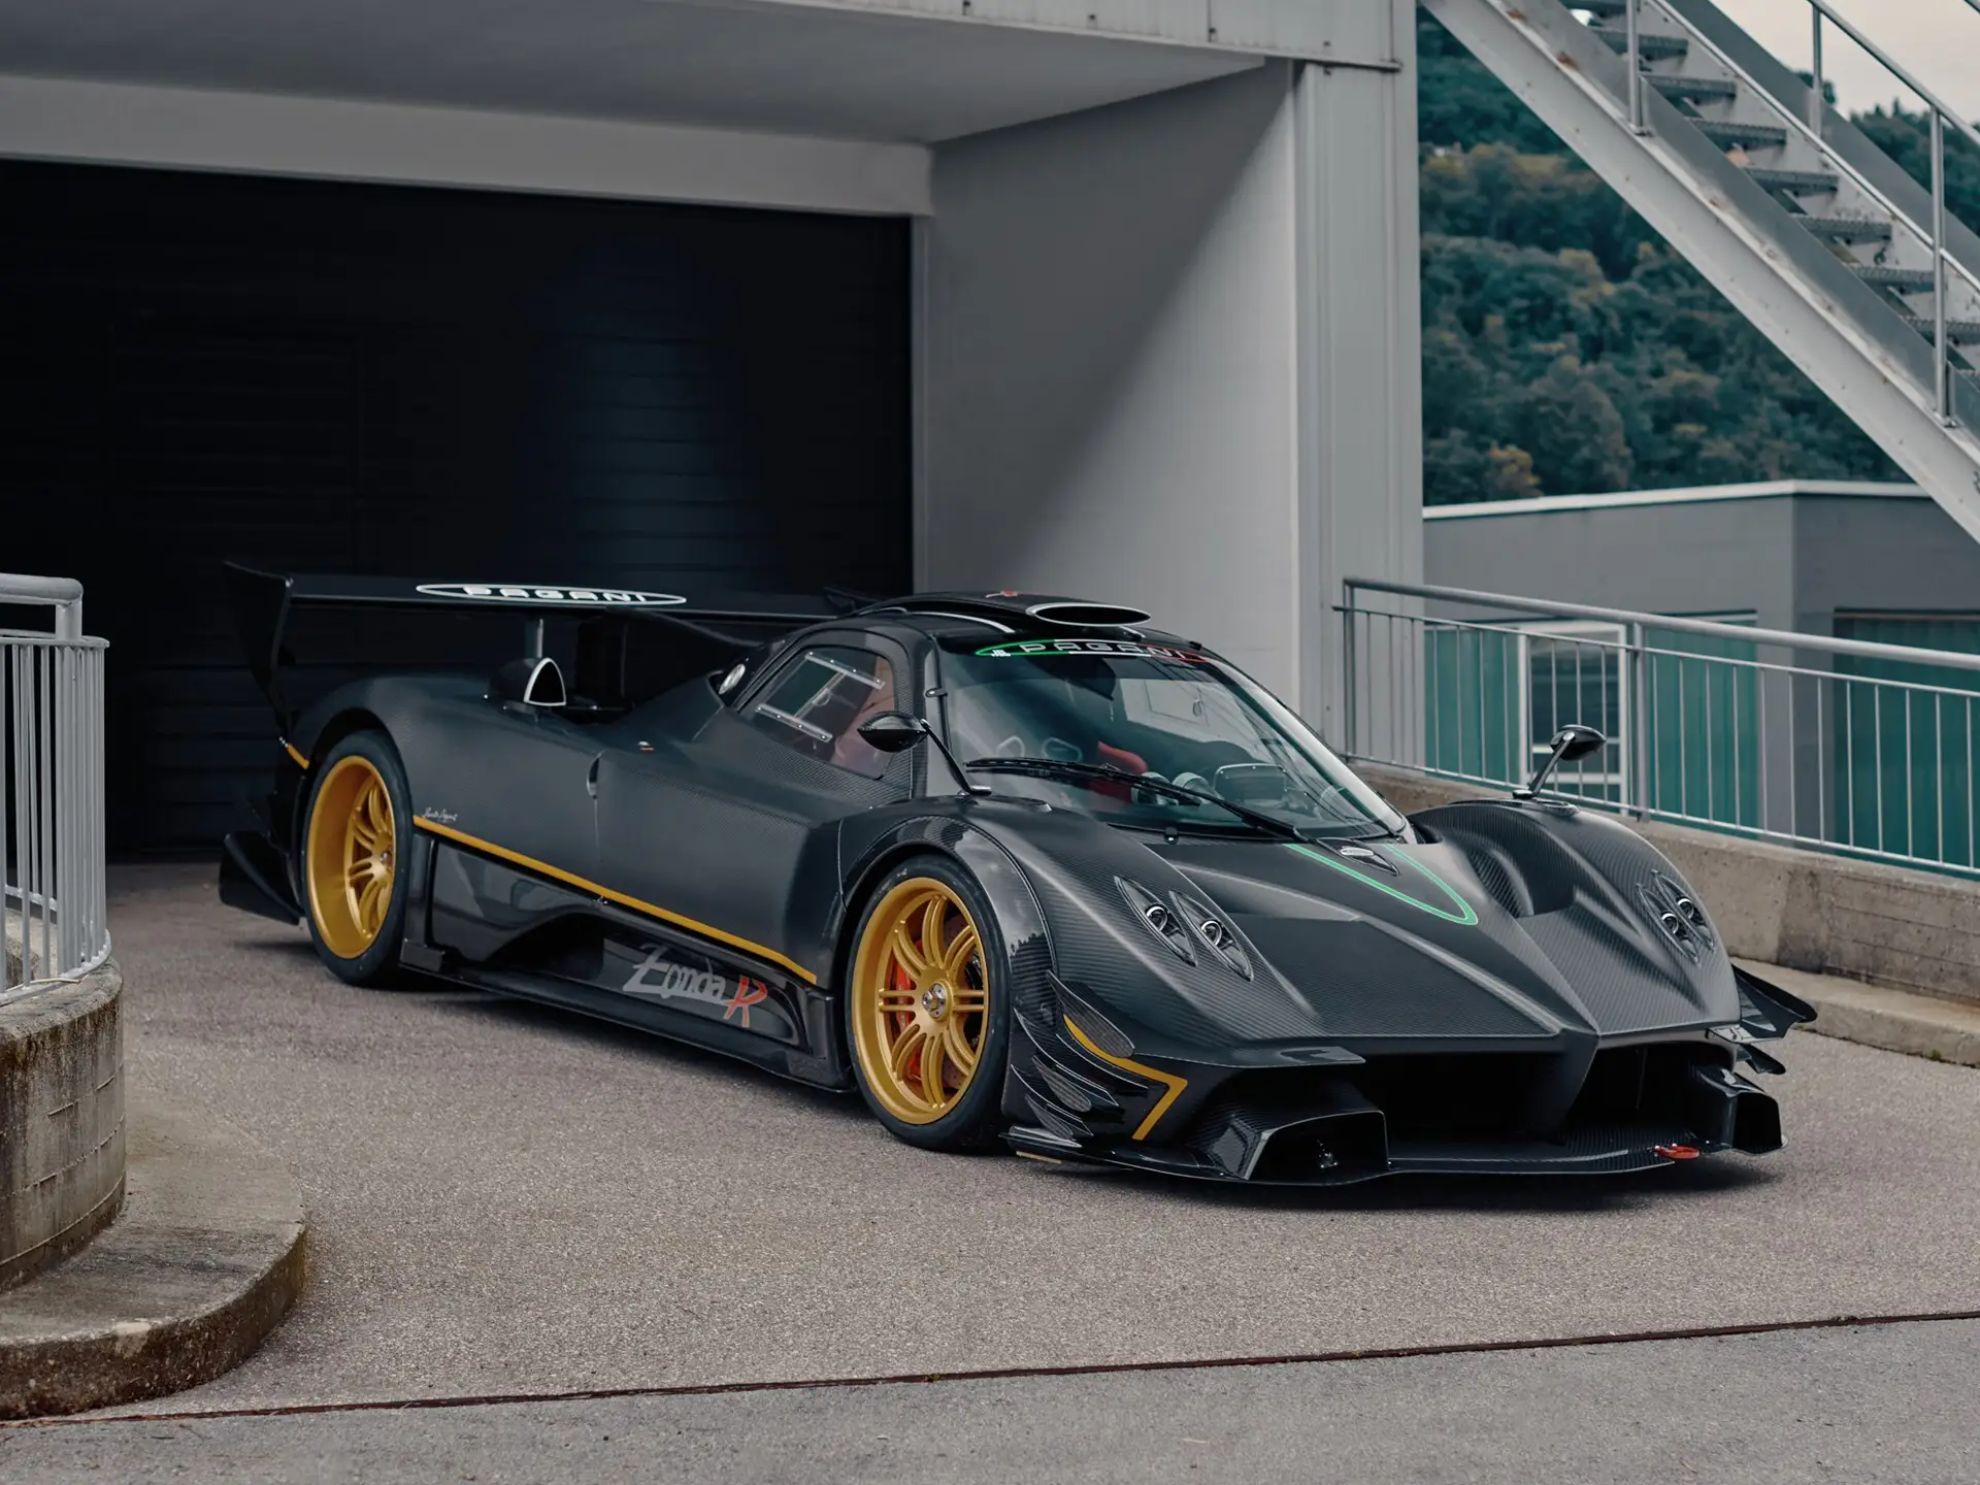 https://s1.cdn.autoevolution.com/images/news/gallery/this-1-of-10-pagani-zonda-r-might-be-the-closest-you-ll-get-to-track-focused-perfection_16.jpg